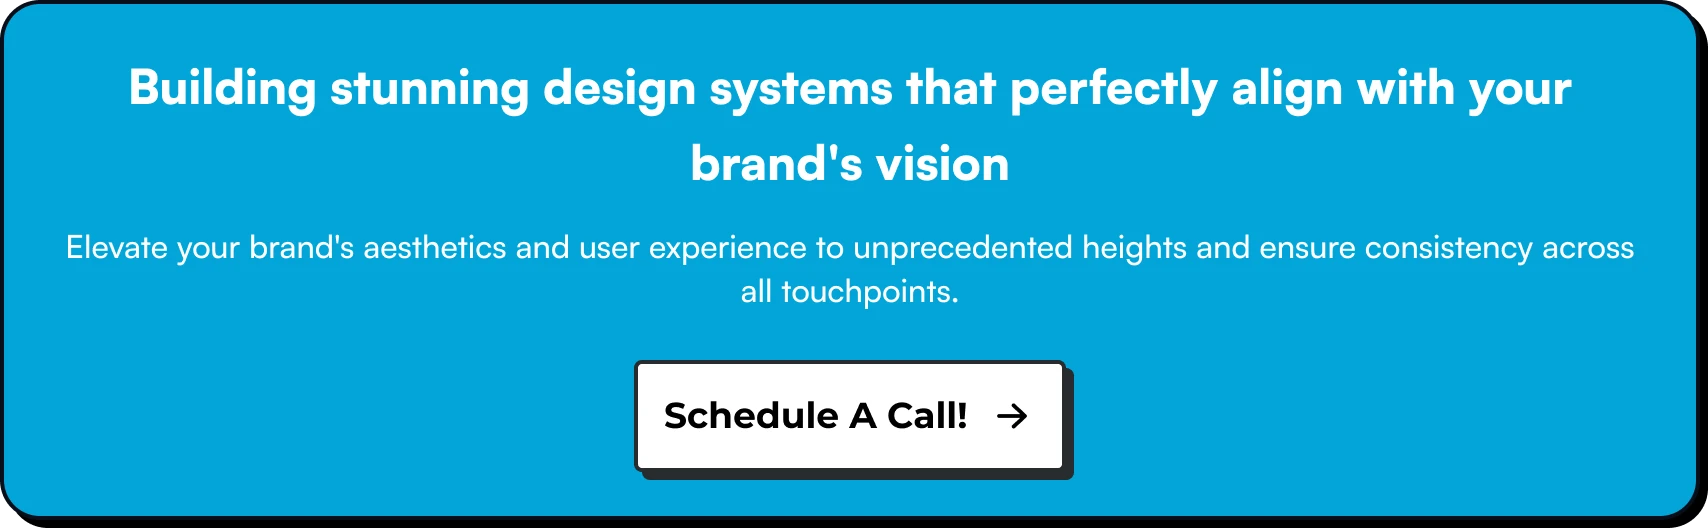 Building stunning design systems that perfectly align with your brand vision